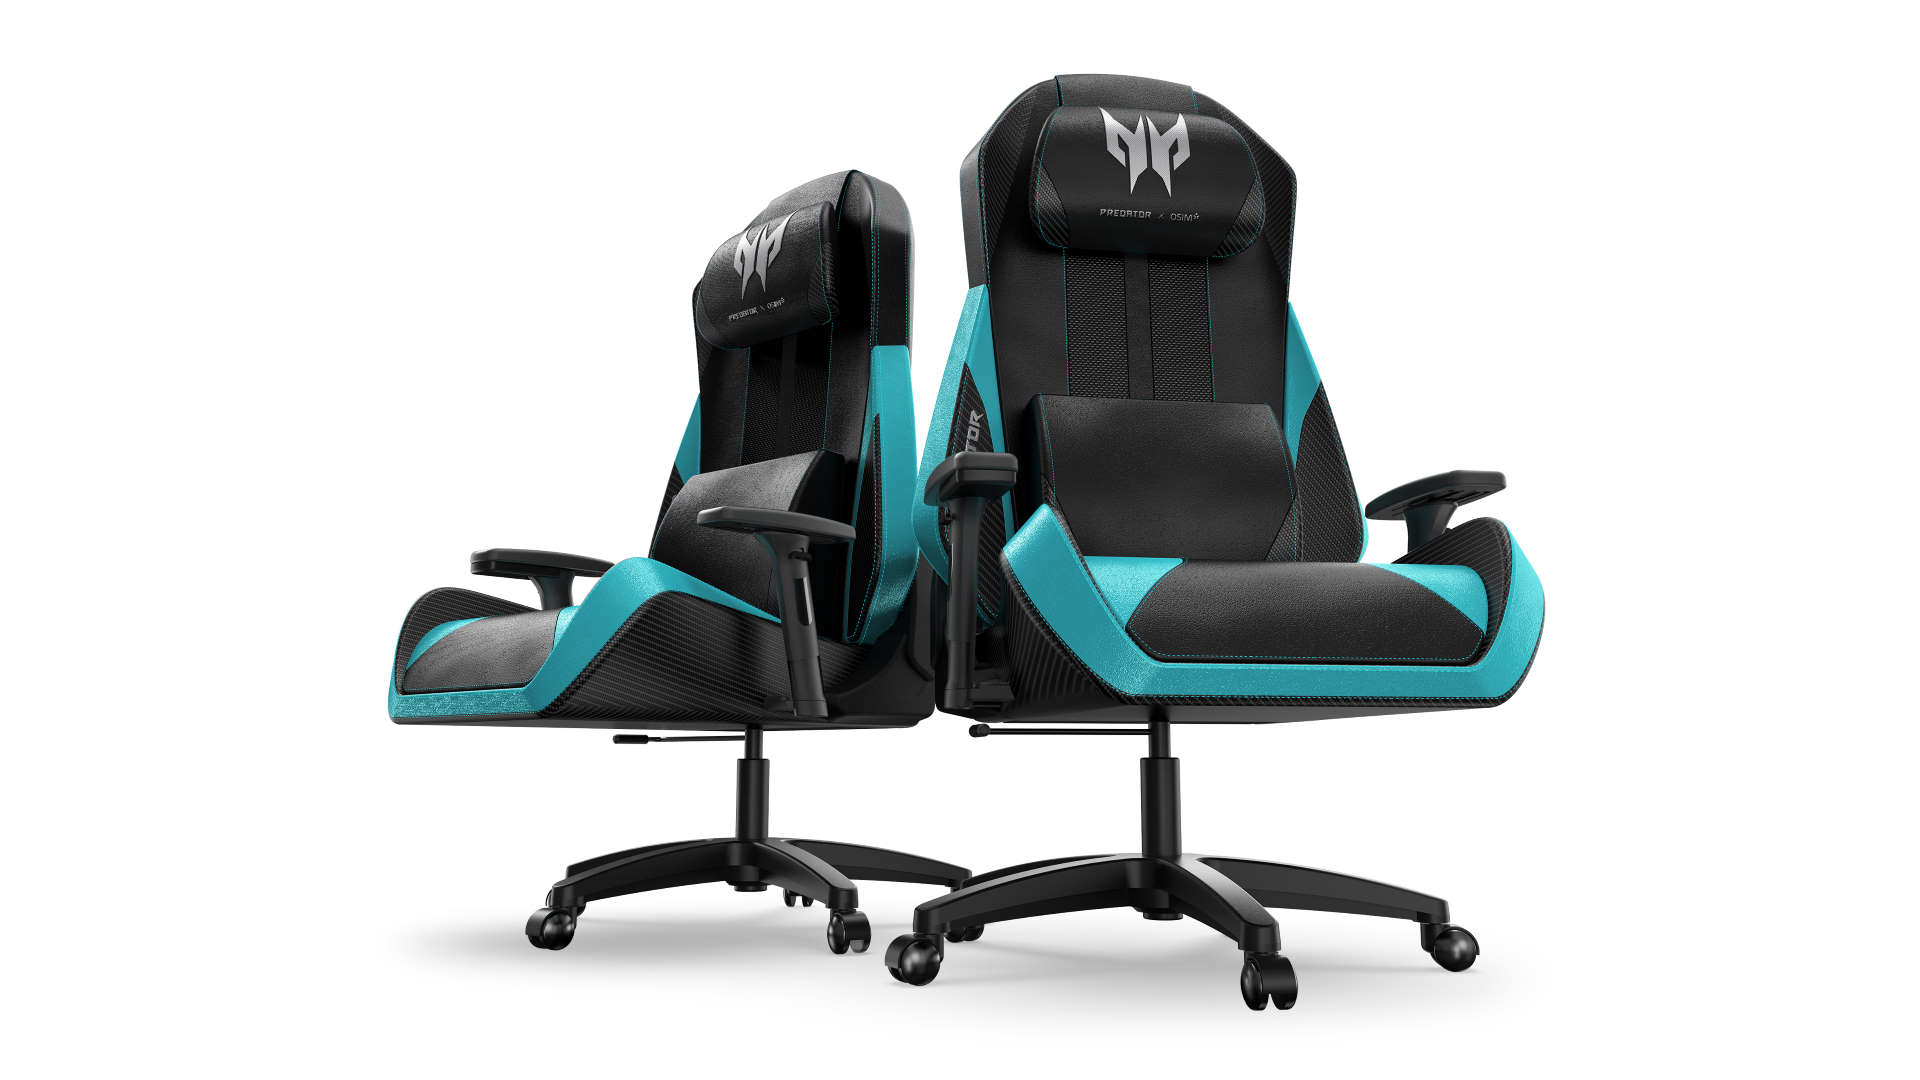 Acer S New Predator Gaming Chair Will Soothe You In Ways Others Don T Pc Gamer